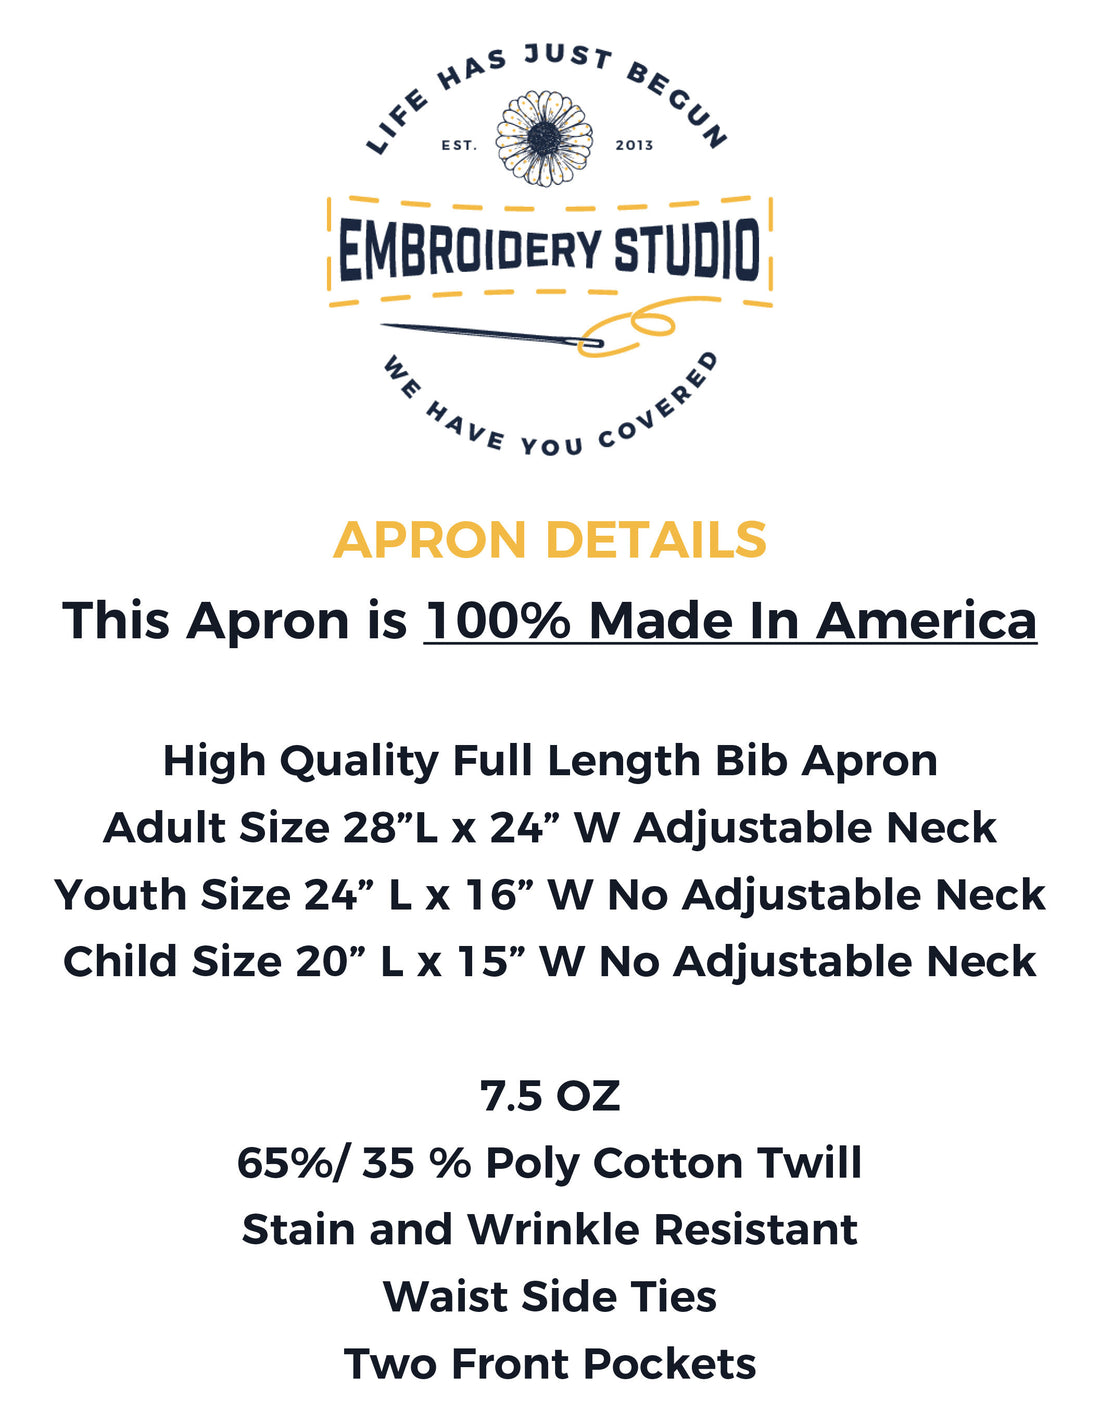 Apron Specifications - Life Has Just Begun